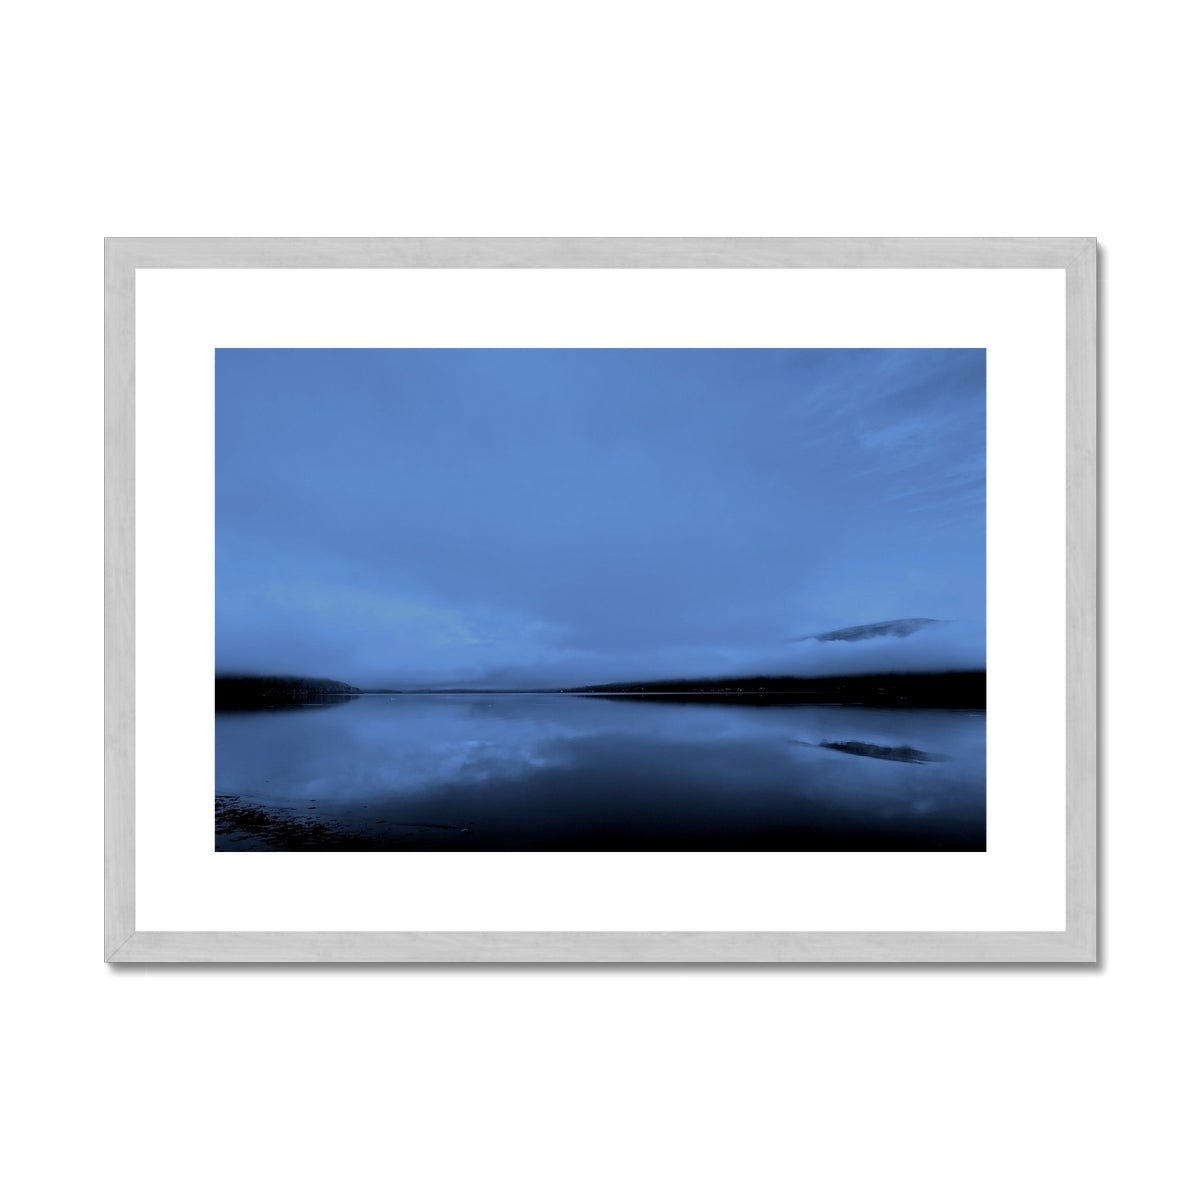 The Blue Hour Loch Fyne Painting | Antique Framed & Mounted Prints From Scotland-Antique Framed & Mounted Prints-Scottish Lochs & Mountains Art Gallery-A2 Landscape-Silver Frame-Paintings, Prints, Homeware, Art Gifts From Scotland By Scottish Artist Kevin Hunter